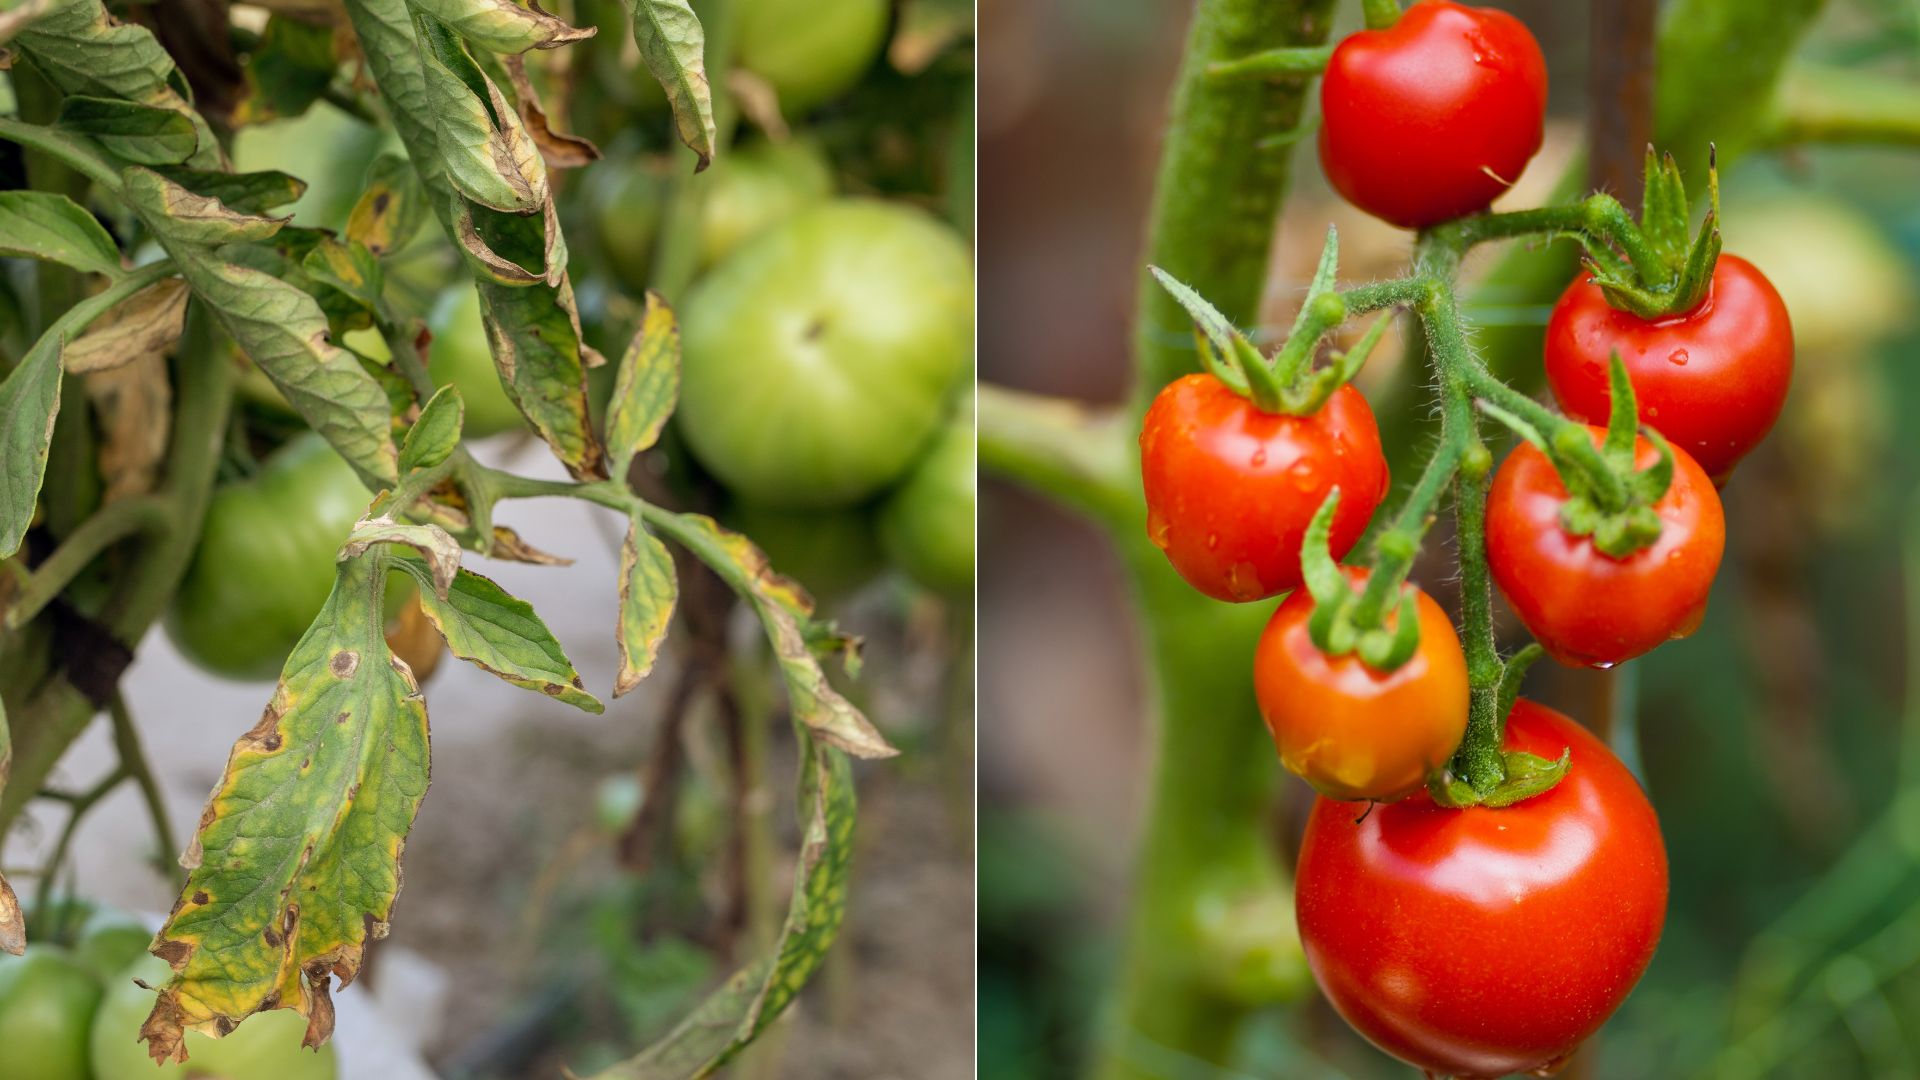 This Is Why Your Tomato Plant Leaves Turn Brown And What You Should Do To Fix It